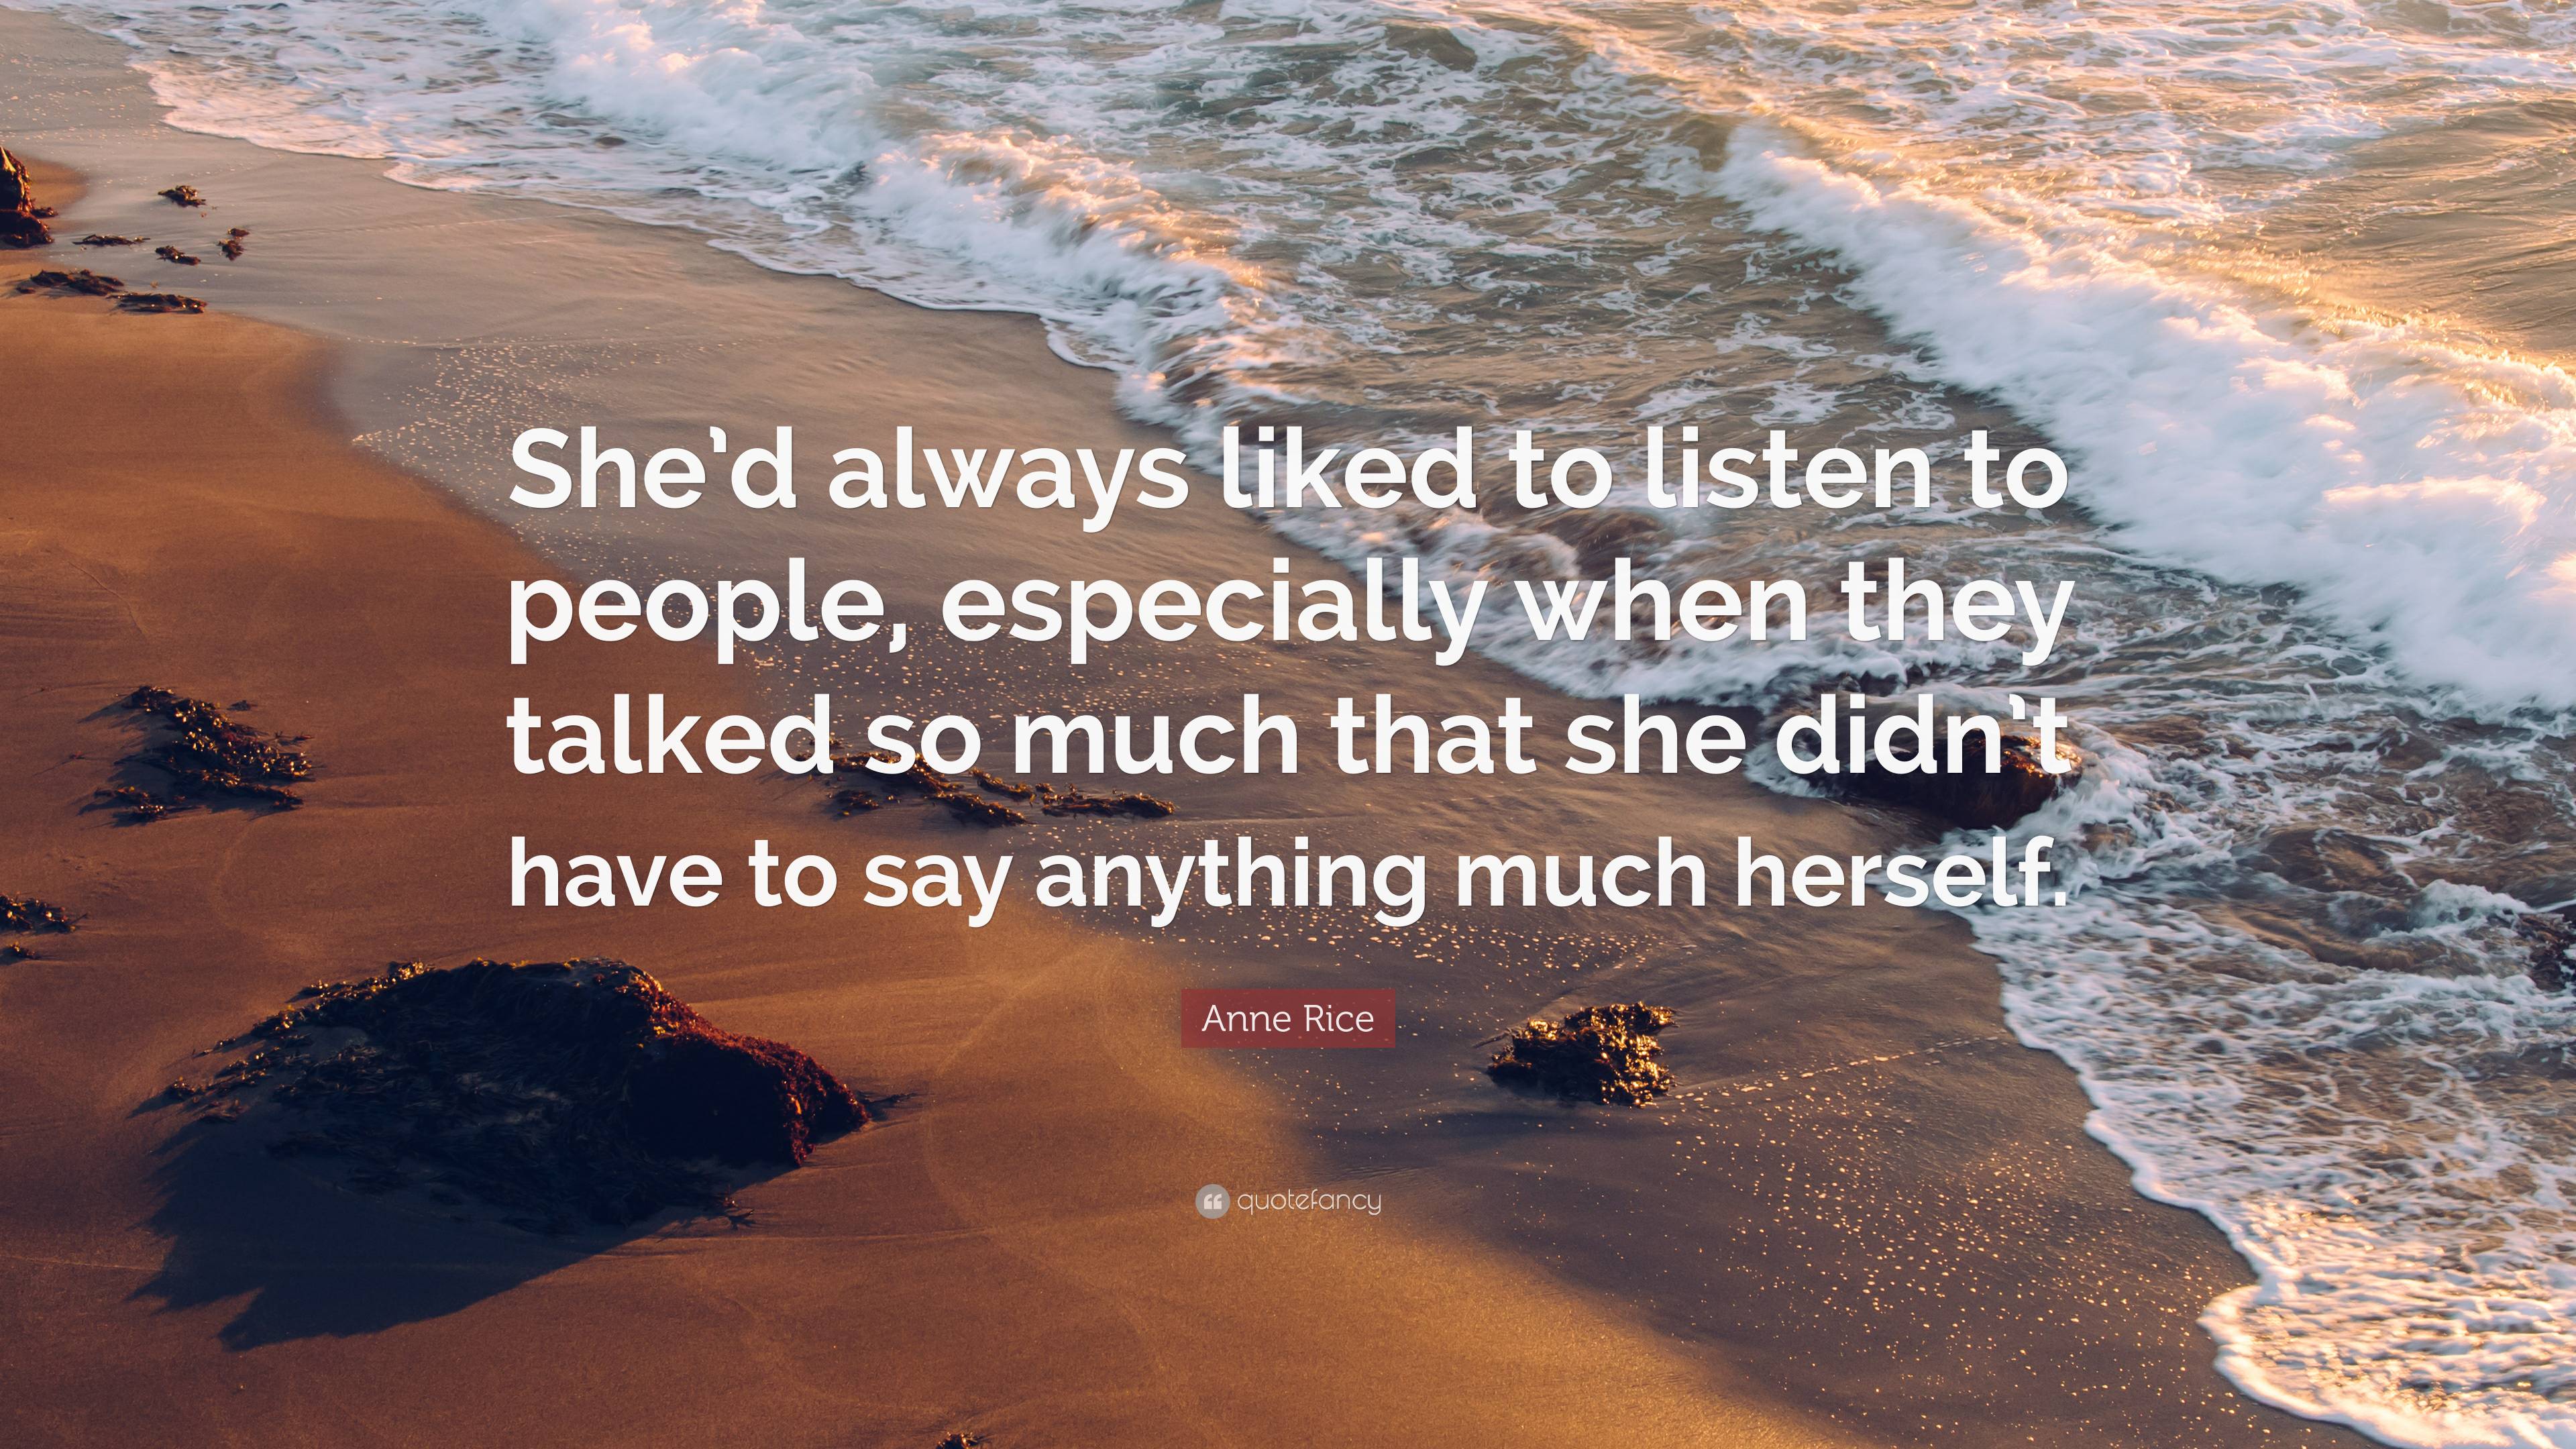 Anne Rice Quote: “She’d always liked to listen to people, especially ...